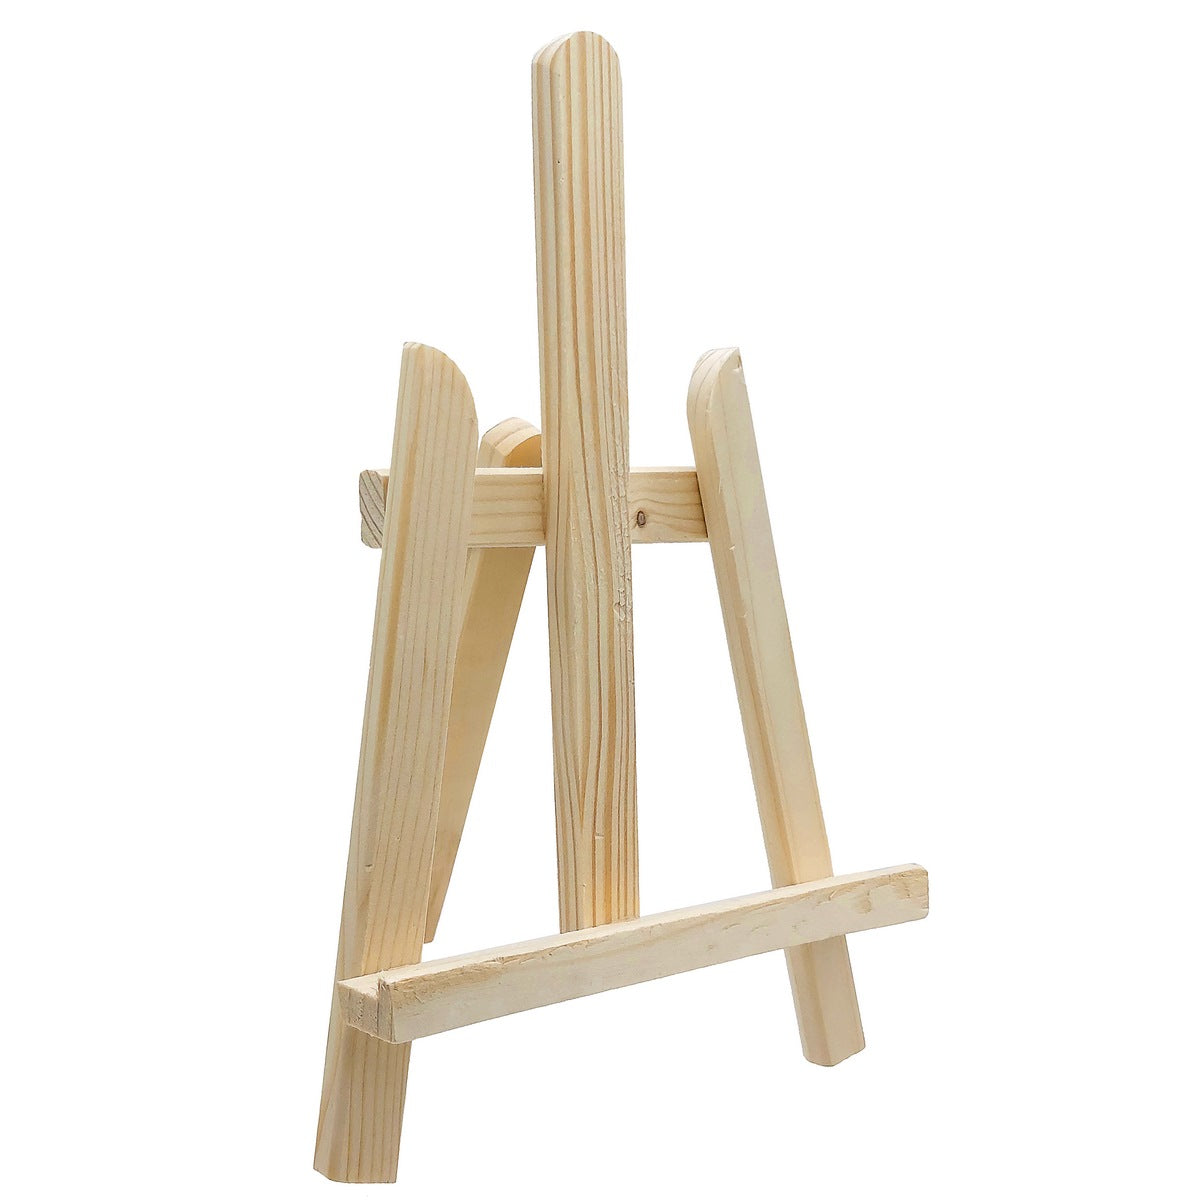 jags-mumbai Easel Extra-Large Wooden Easel Stand Big XL 12 Inch (WES1200)